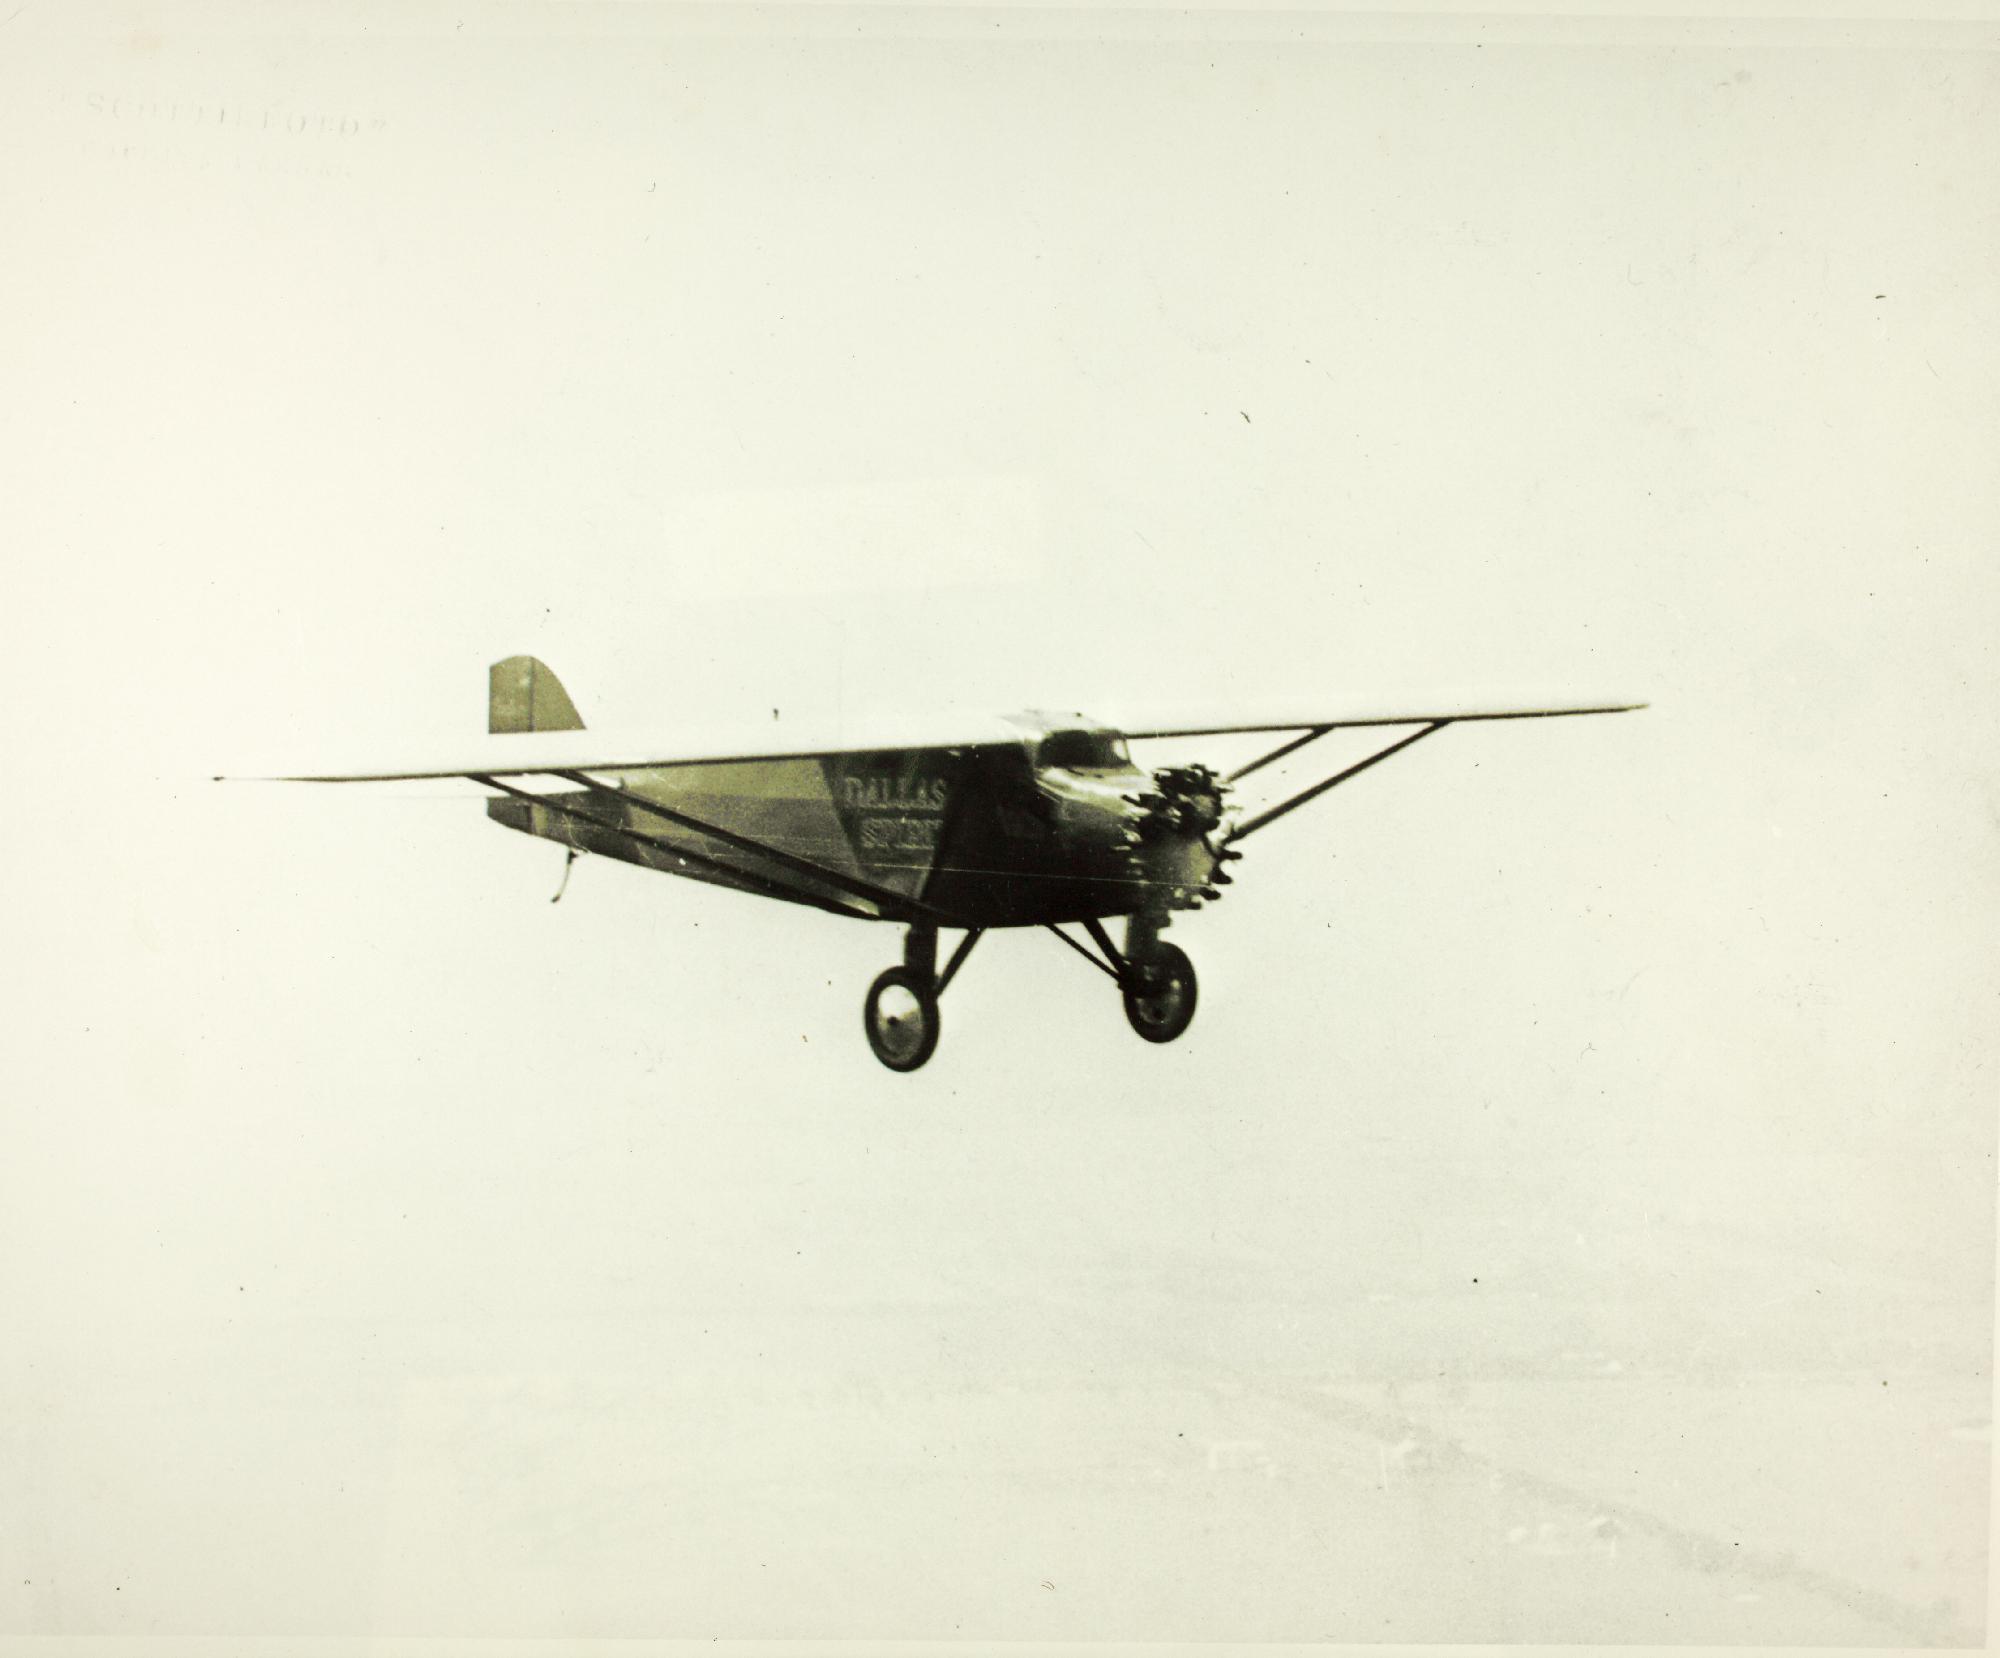 Swallow Monoplane NX914, Dallas Spirit. (San Diego Air and Space Museum Archives)